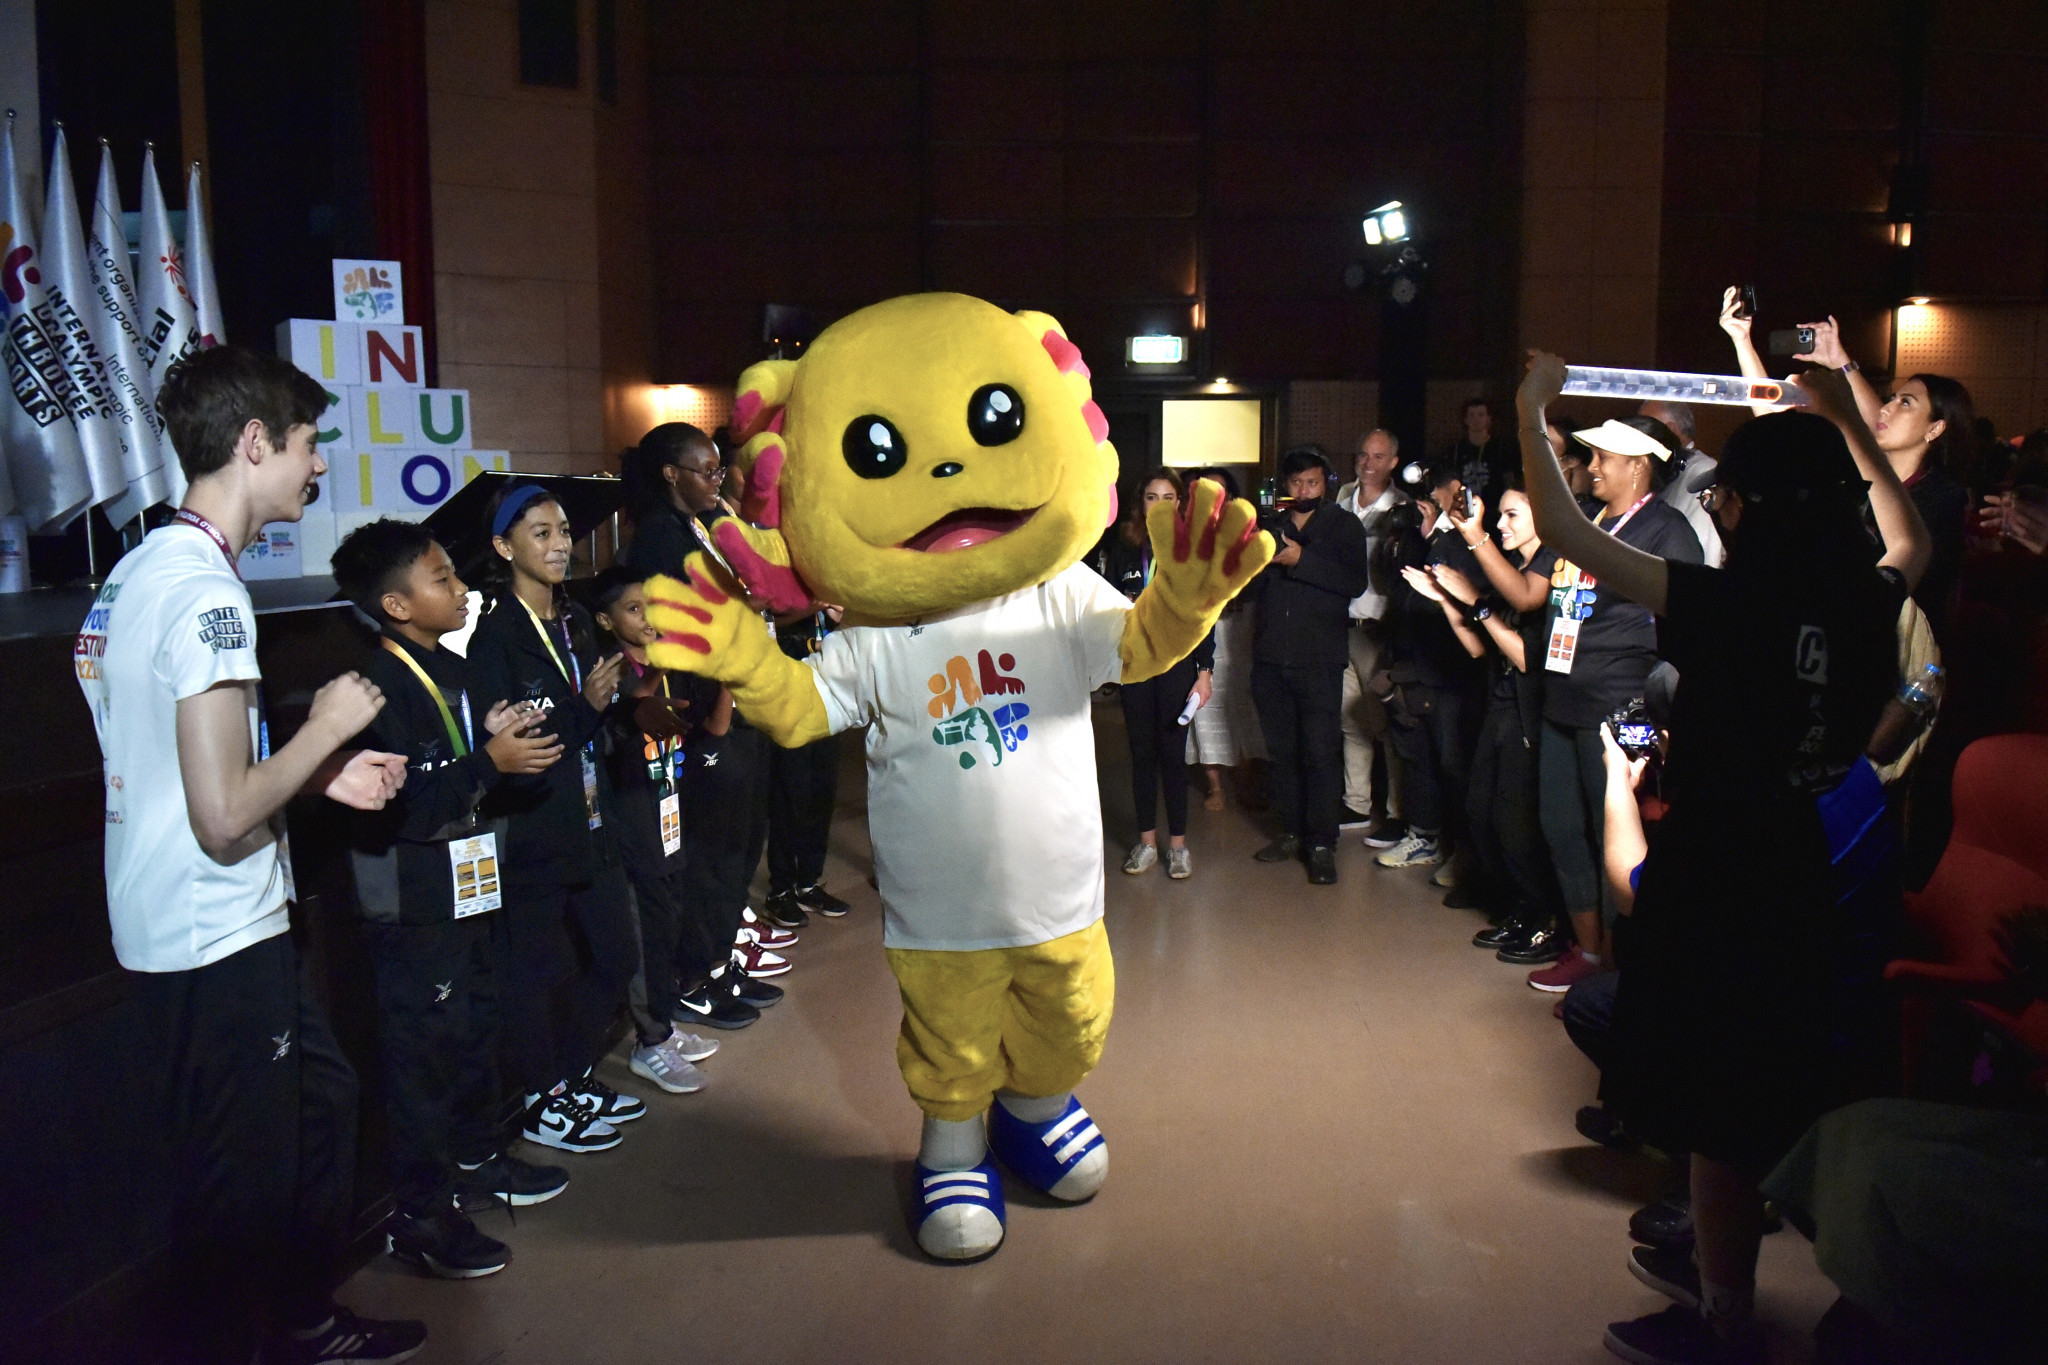 insidethegames is reporting LIVE from the UTS World Youth Festival in Bangkok